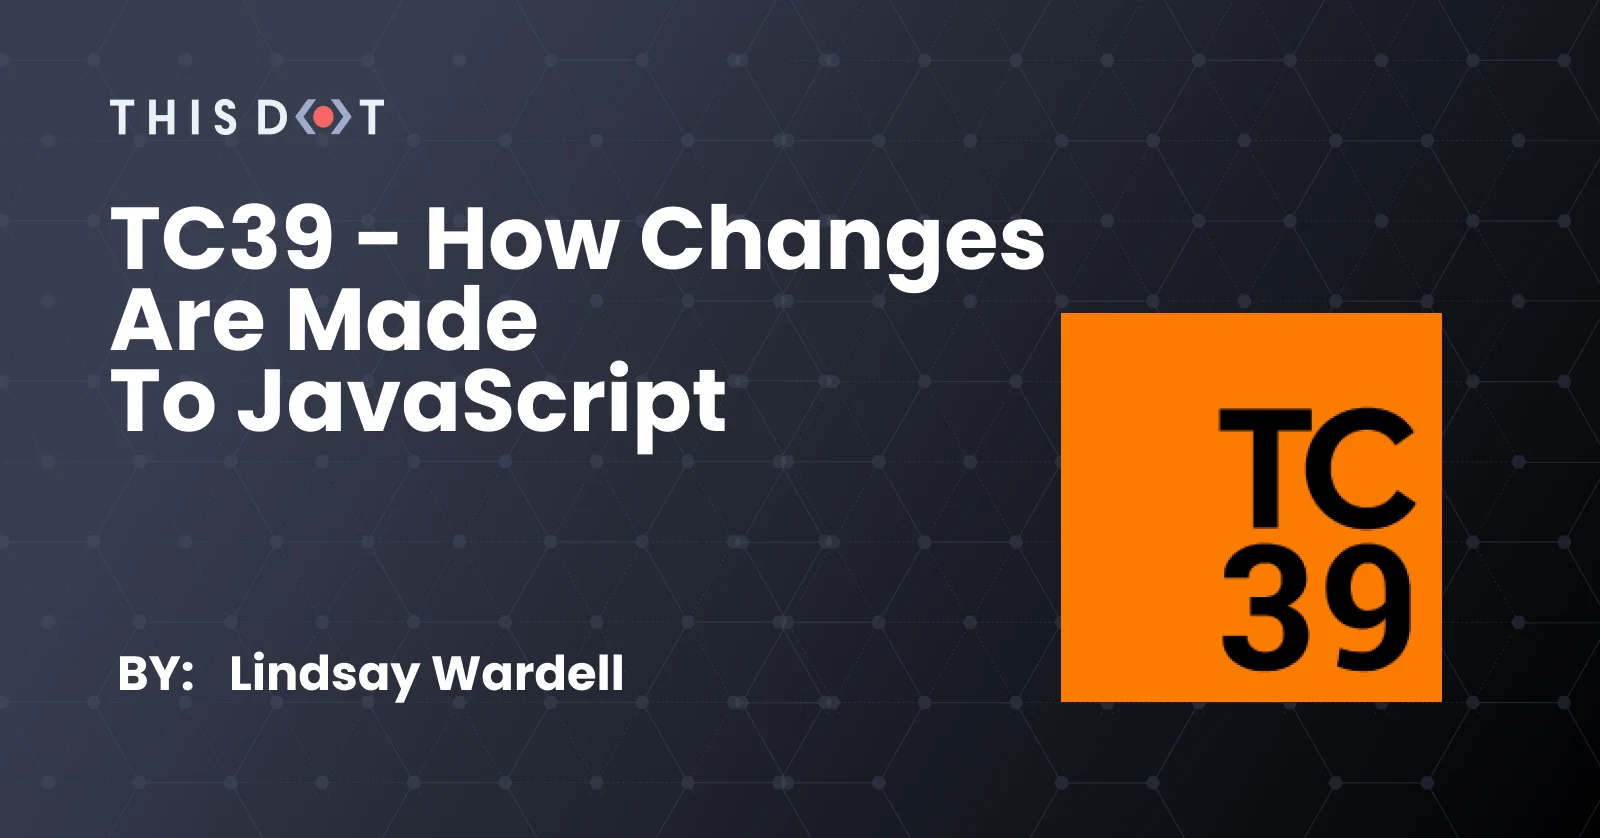 TC39 - How Changes are Made to JavaScript cover image